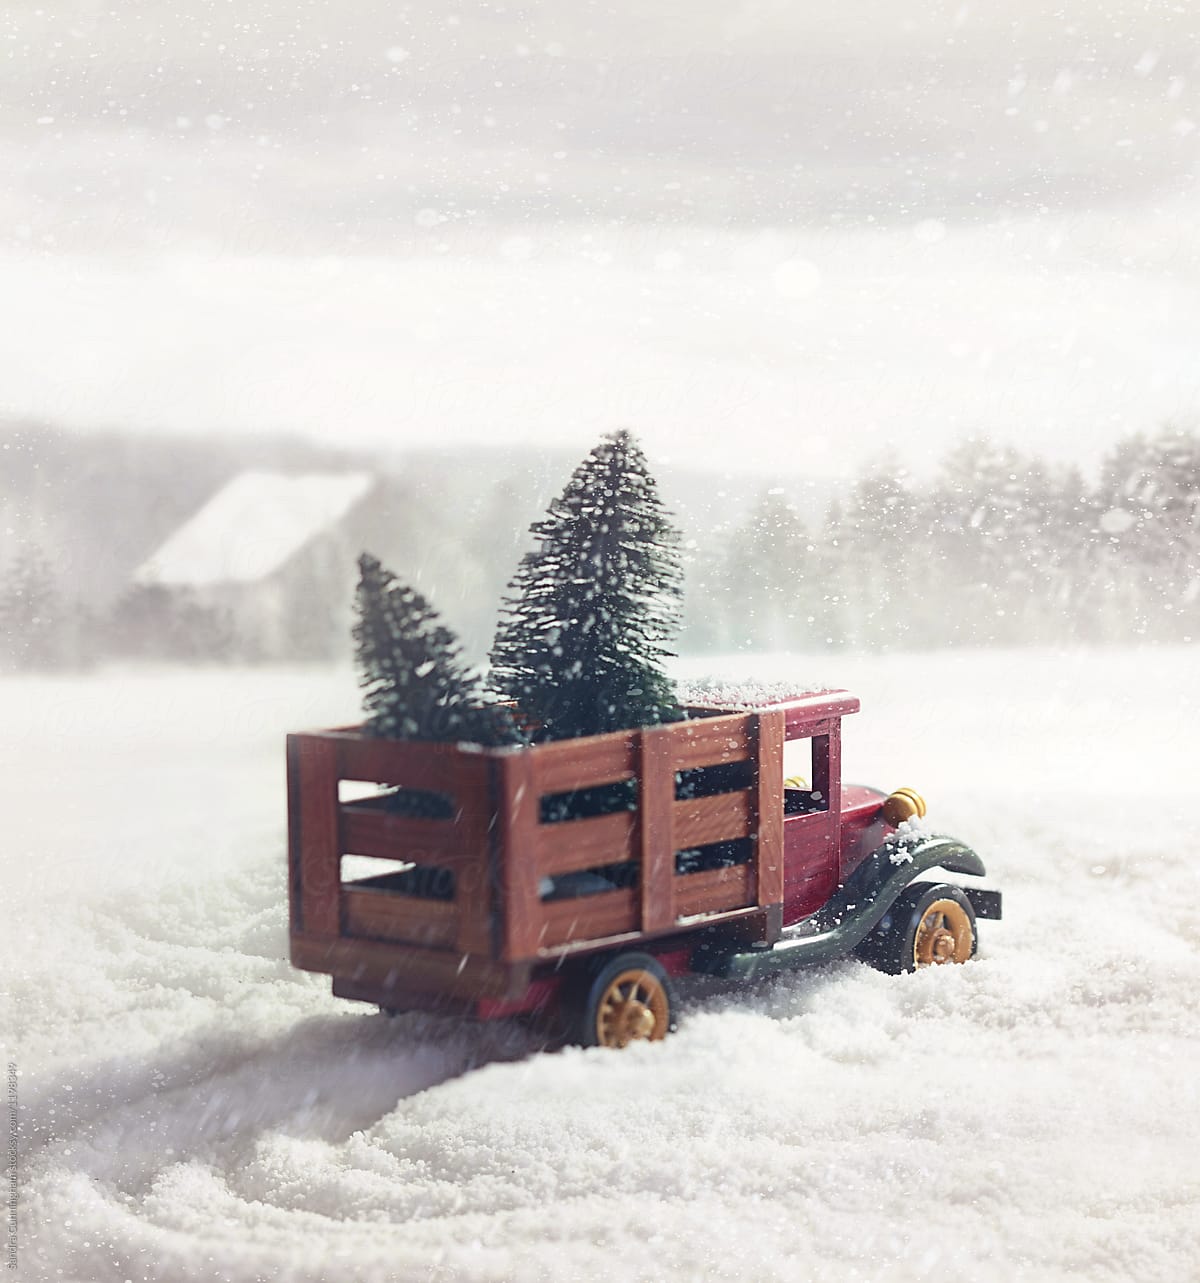 Small toy truck with trees in snow storm